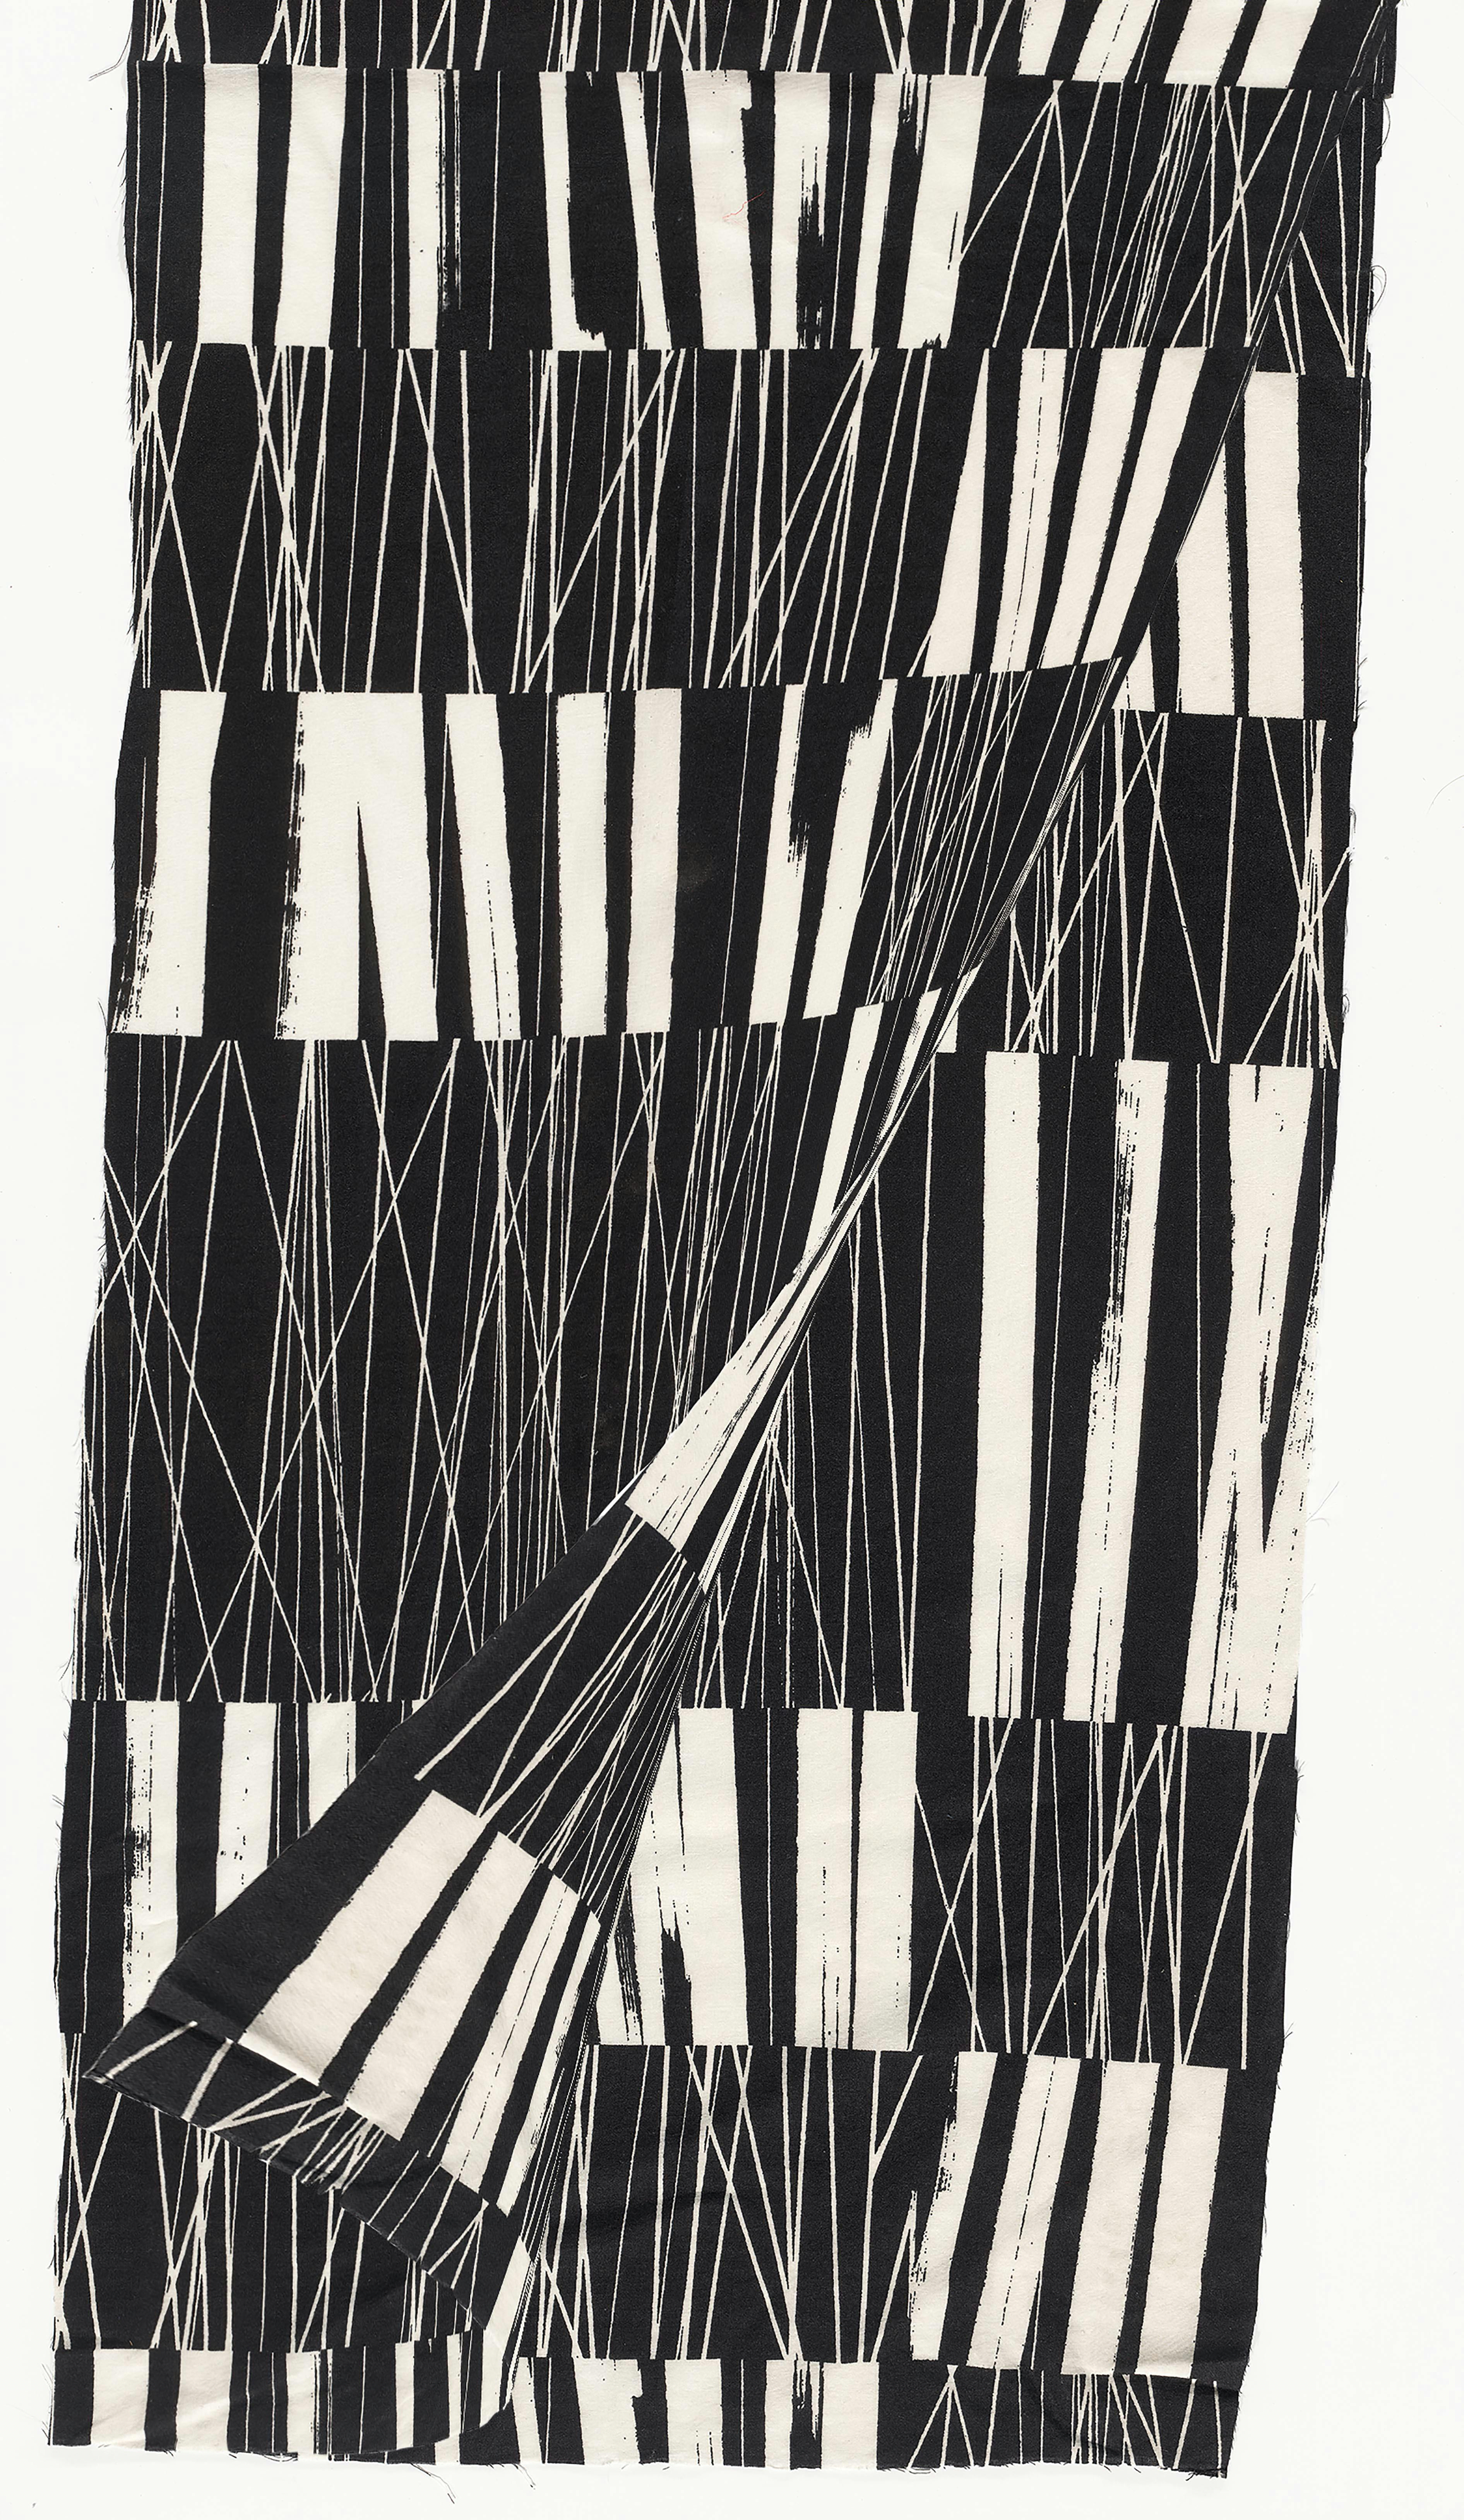 A piece of cloth with a black and white pattern made of vertical lines of varying thicknesses. The bottom right corner of the cloth is lifted up revealing the same fabric beneath it. 